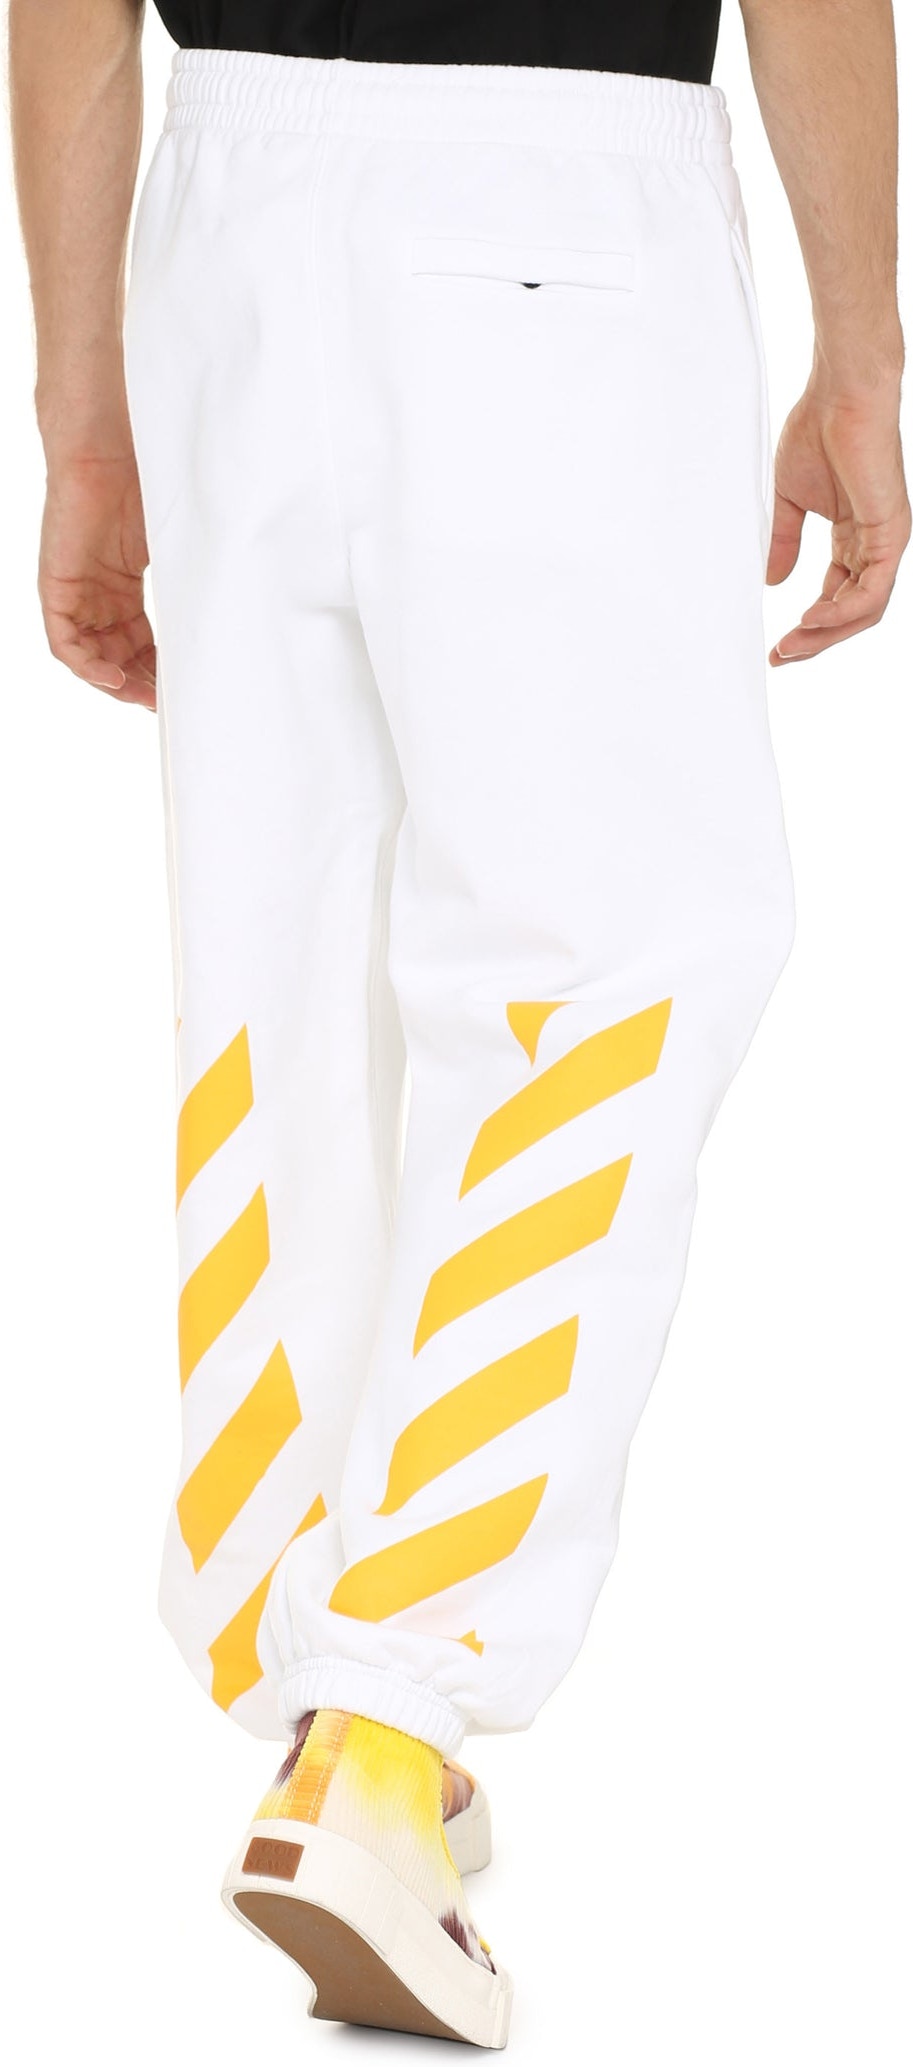 0184 OFF-WHITE COTTON TRACK-PANTS